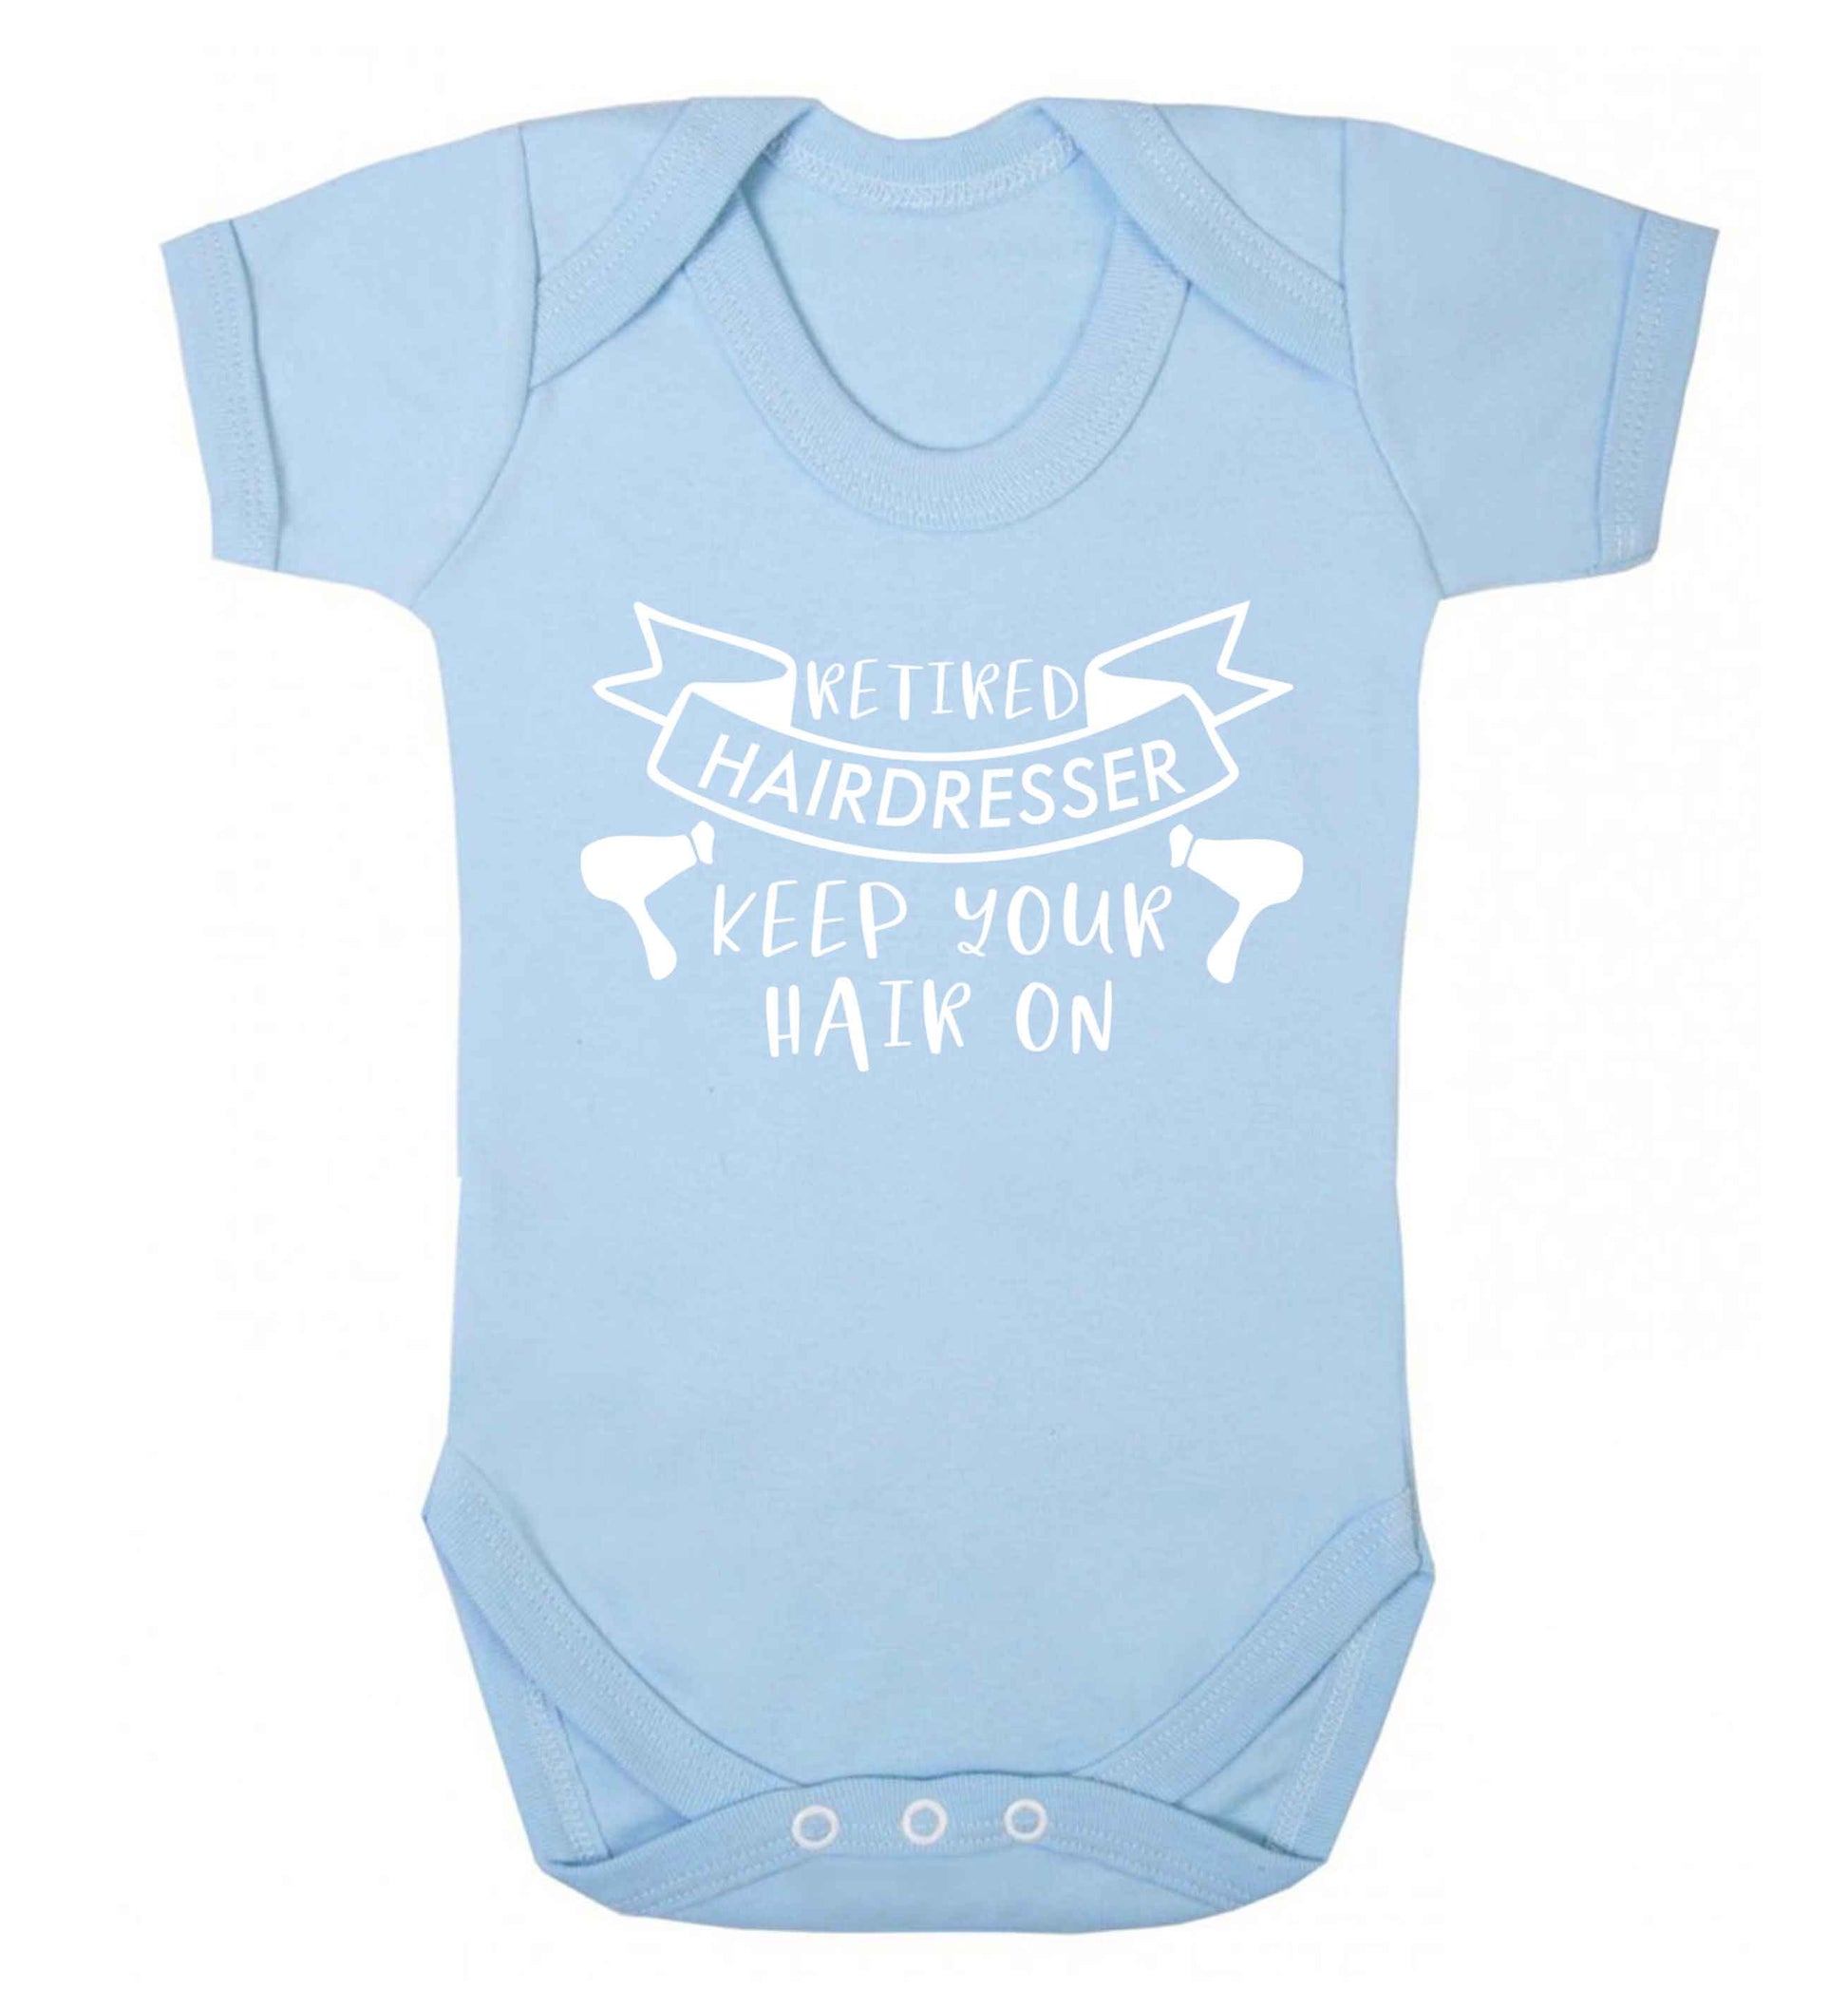 Retired hairdresser keep your hair on Baby Vest pale blue 18-24 months